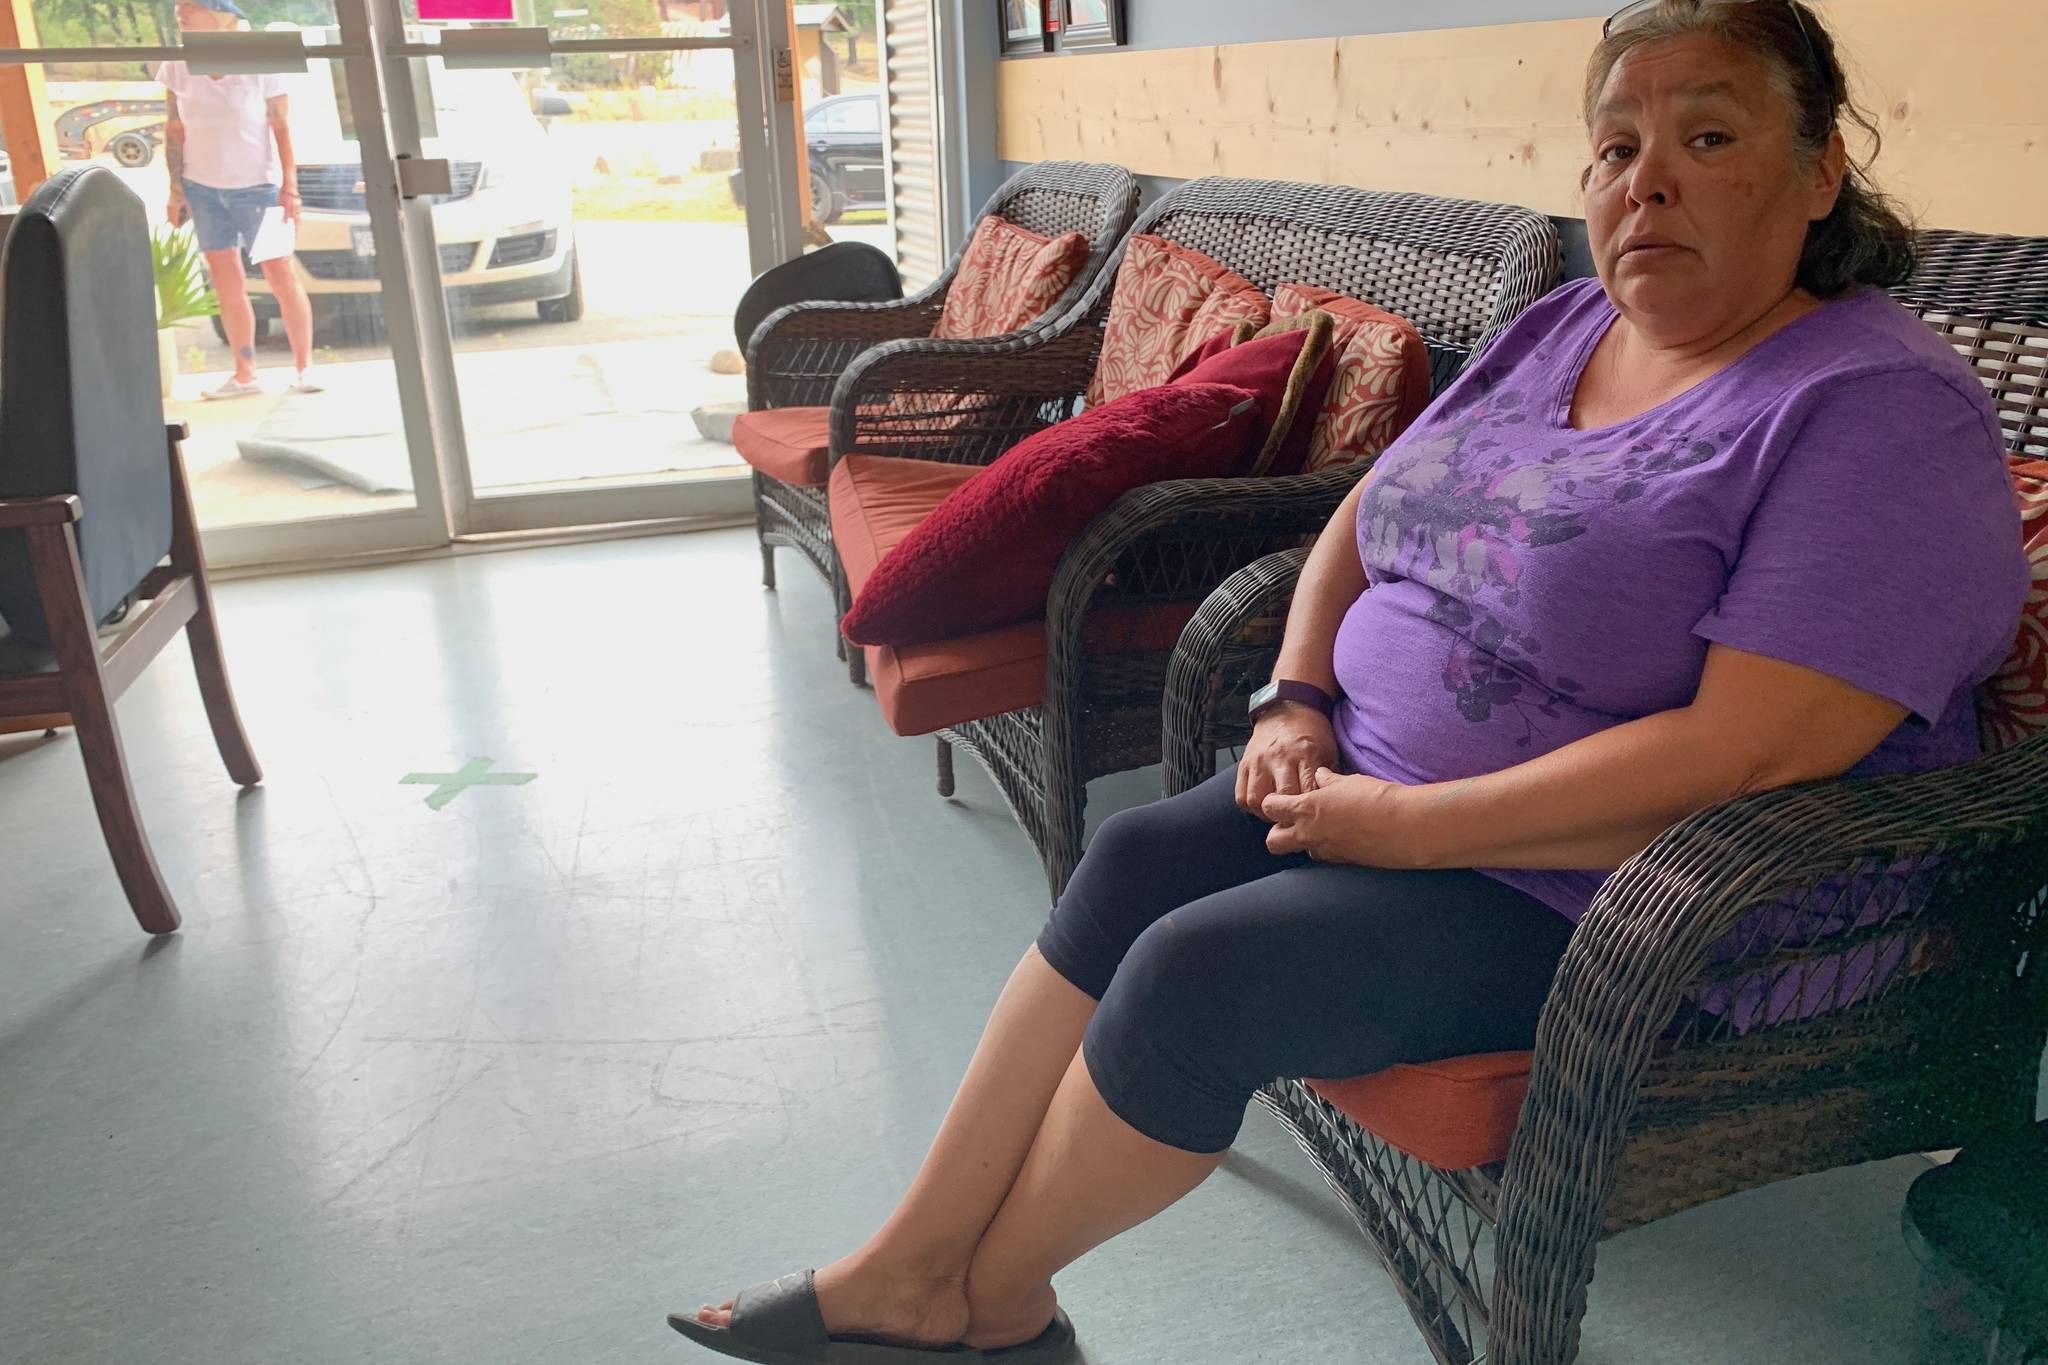 Kasey Johnny, pictured here in Boothroyd on July 1, 2021, has many friends and family in Lytton she said she hadn’t heard from after the devastating fire that destroyed much of the town on June 30, 2021. (Jessica Peters/ Chilliwack Progress)